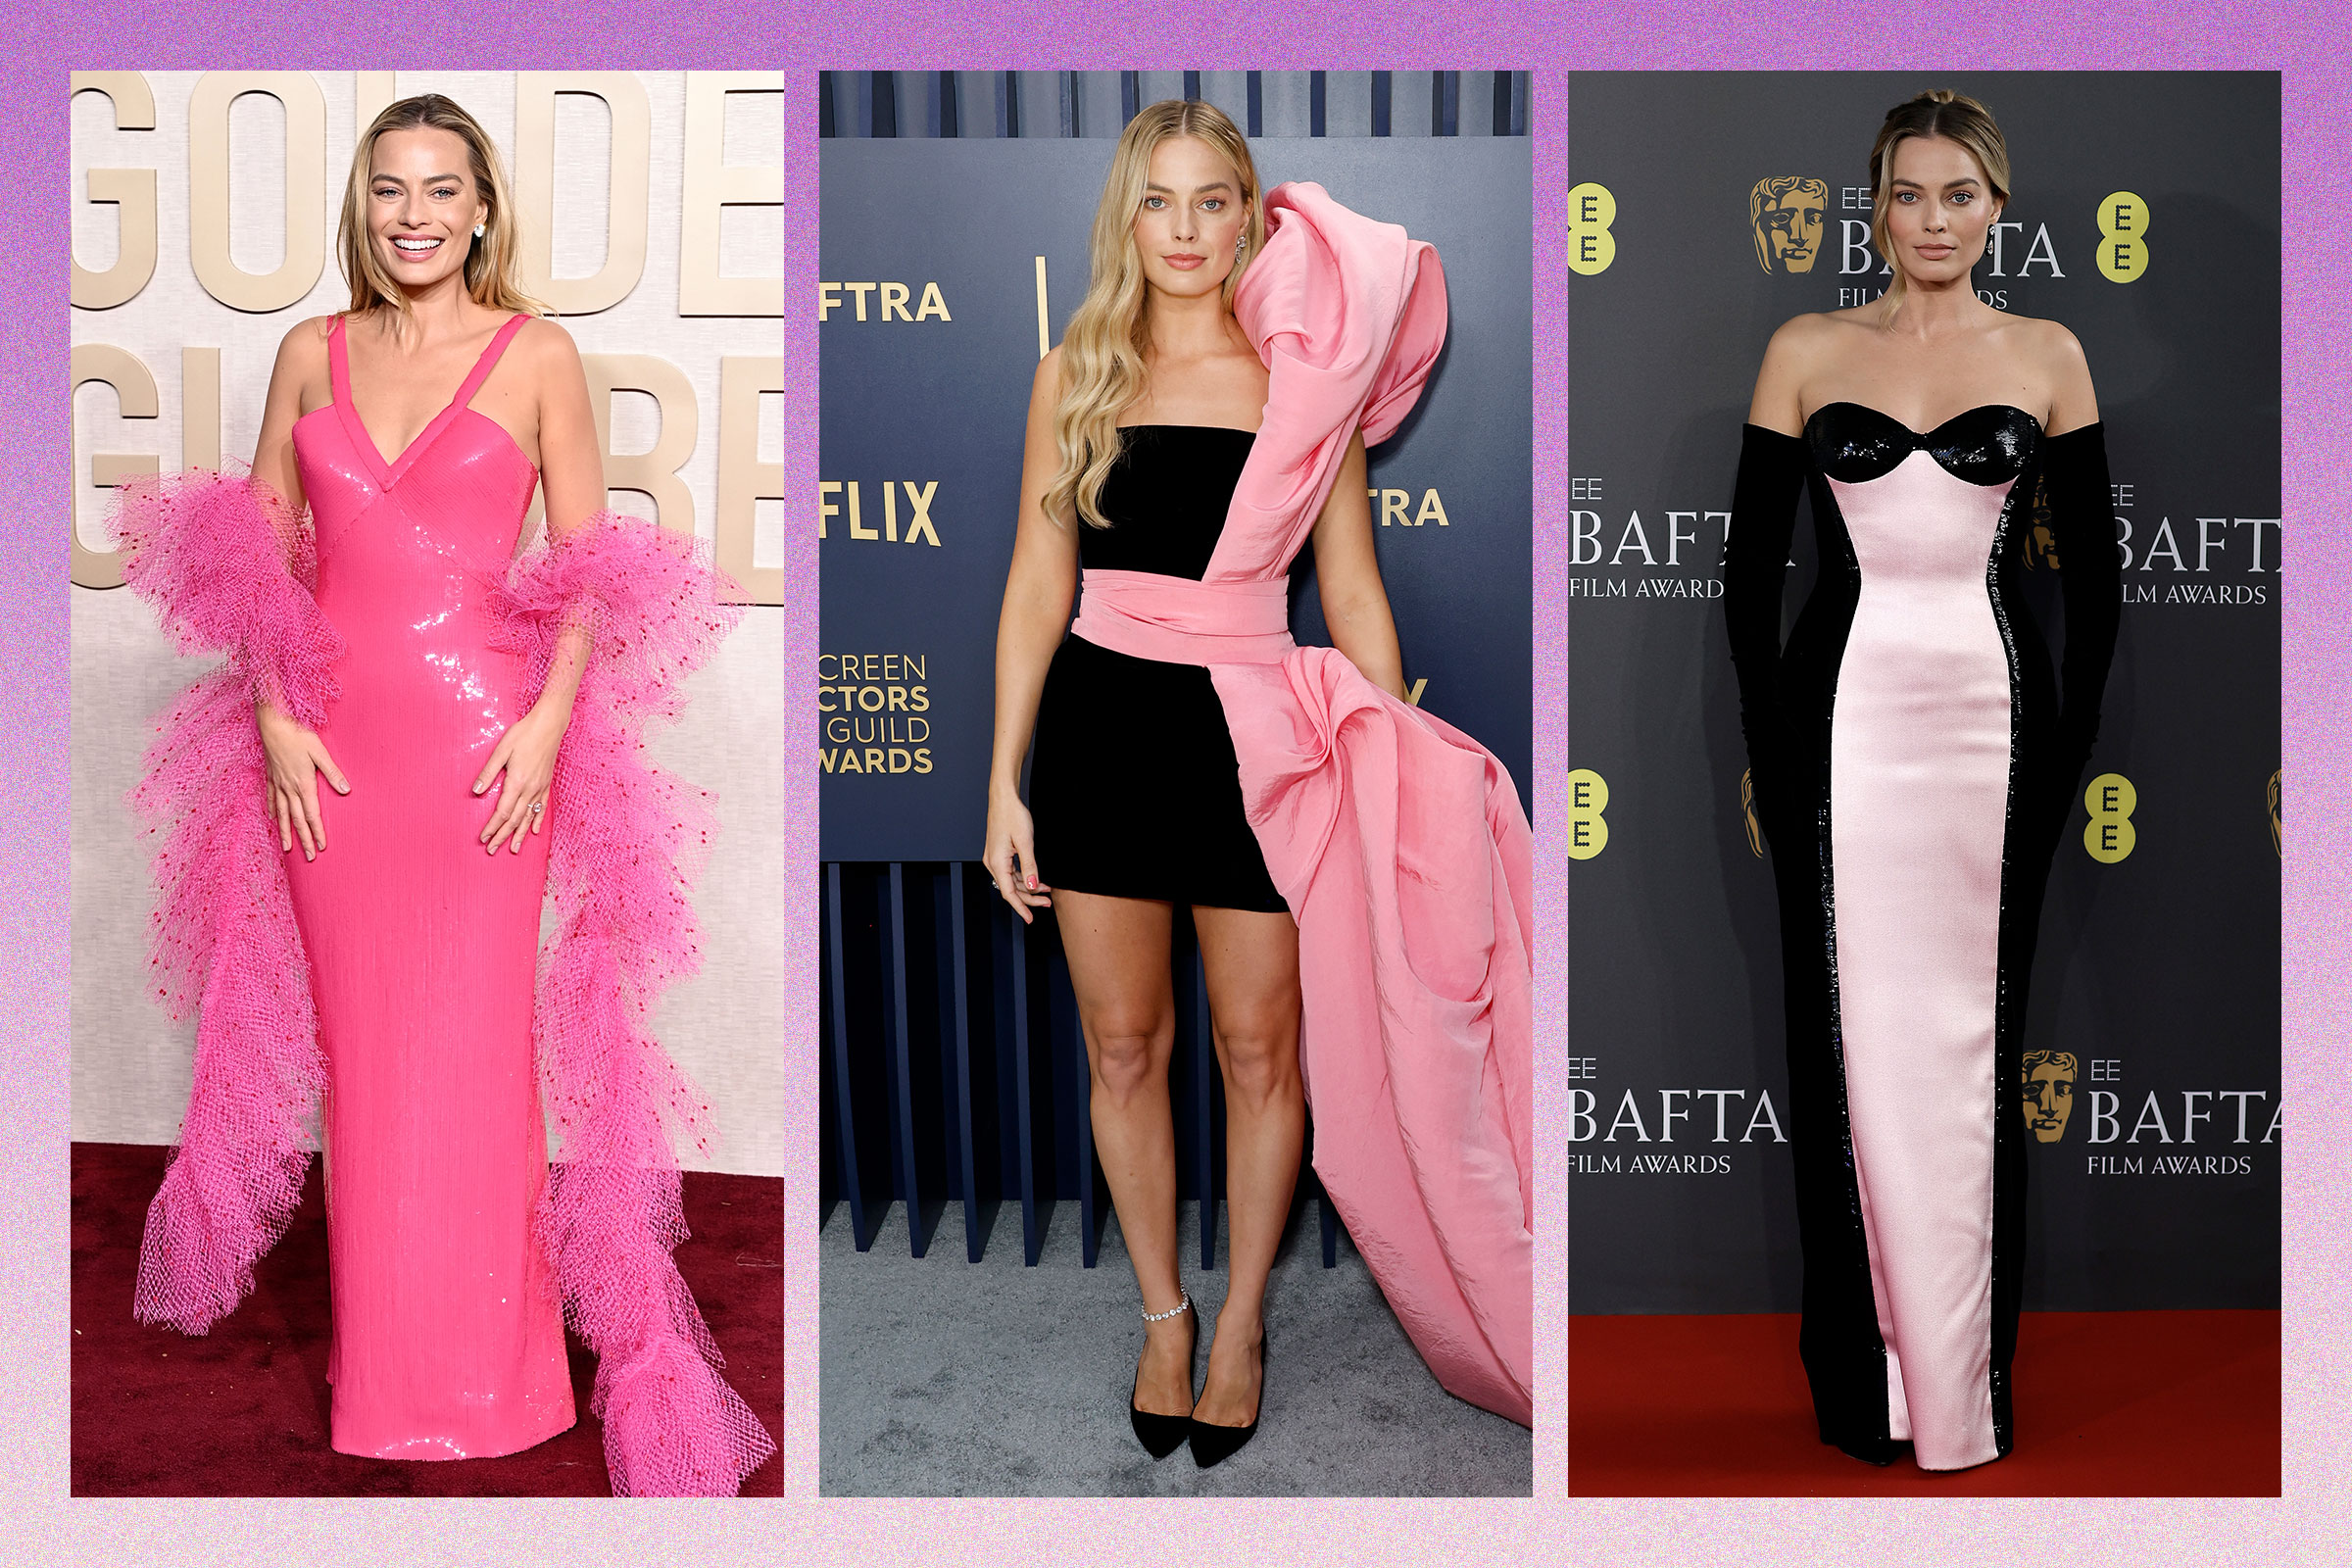 Margot Robbie at the Golden Globe Awards, the Screen Actors Guild Awards, and the BAFTA Film Awards